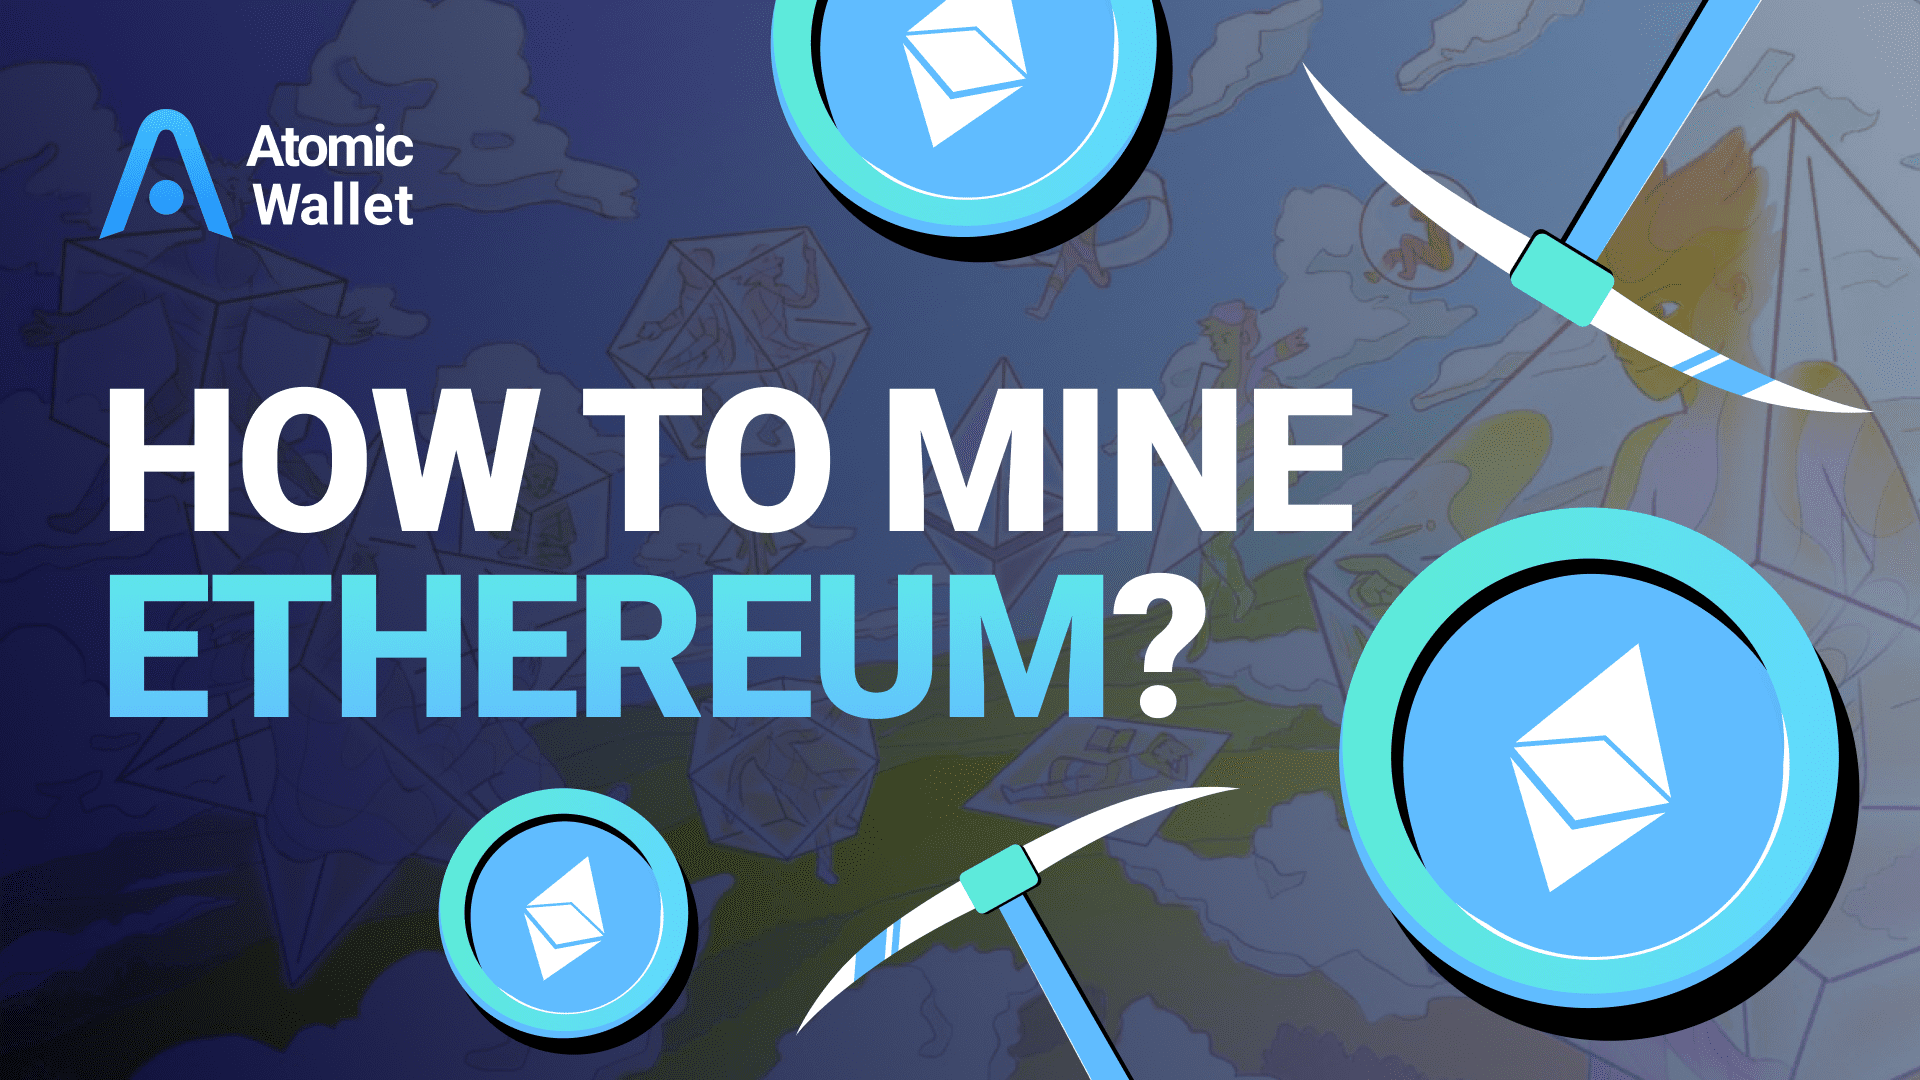 "How to Mine Cryptocurrency at Home"